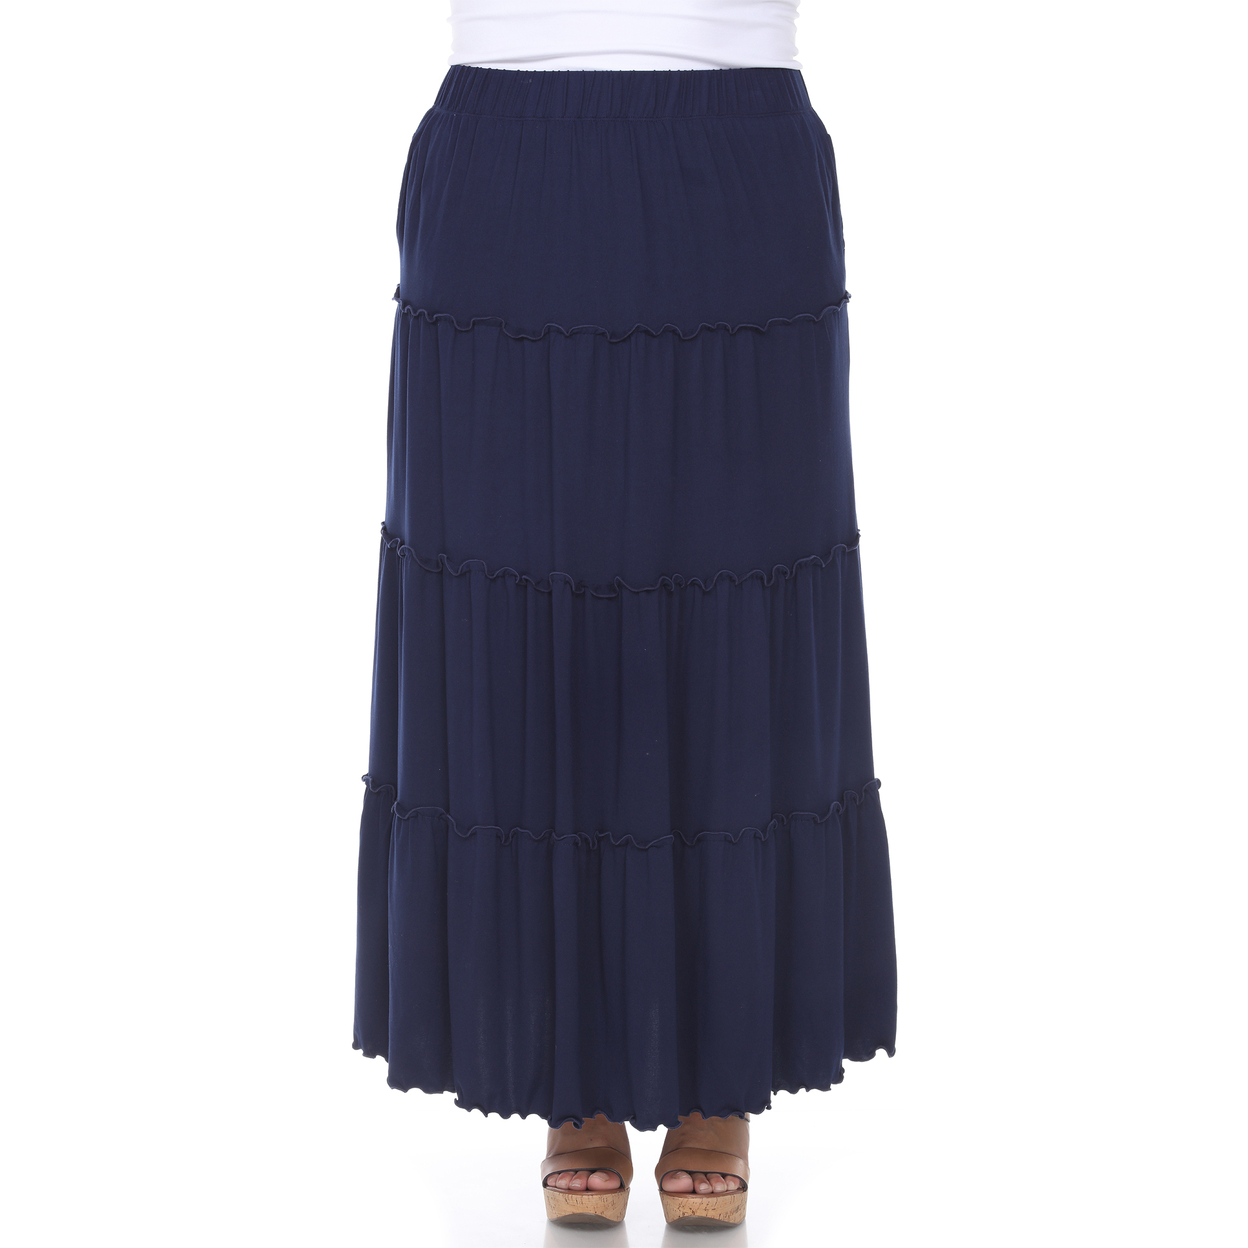 White Mark Women's Plus Size Tiered Maxi Skirt With Pockets - Denim Blue, 1x